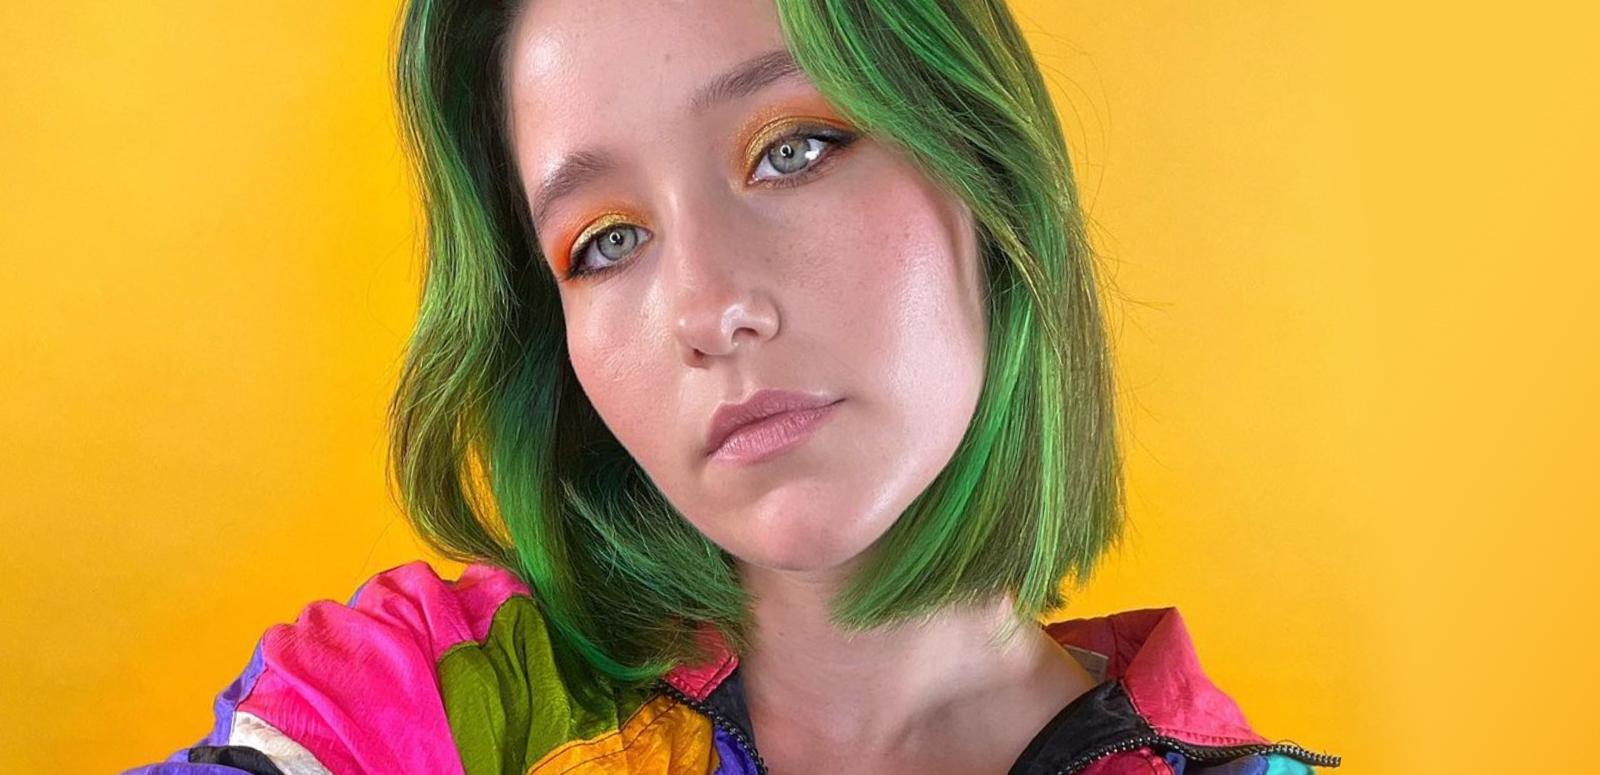 Woman with green hair looking at camera, against a yellow background